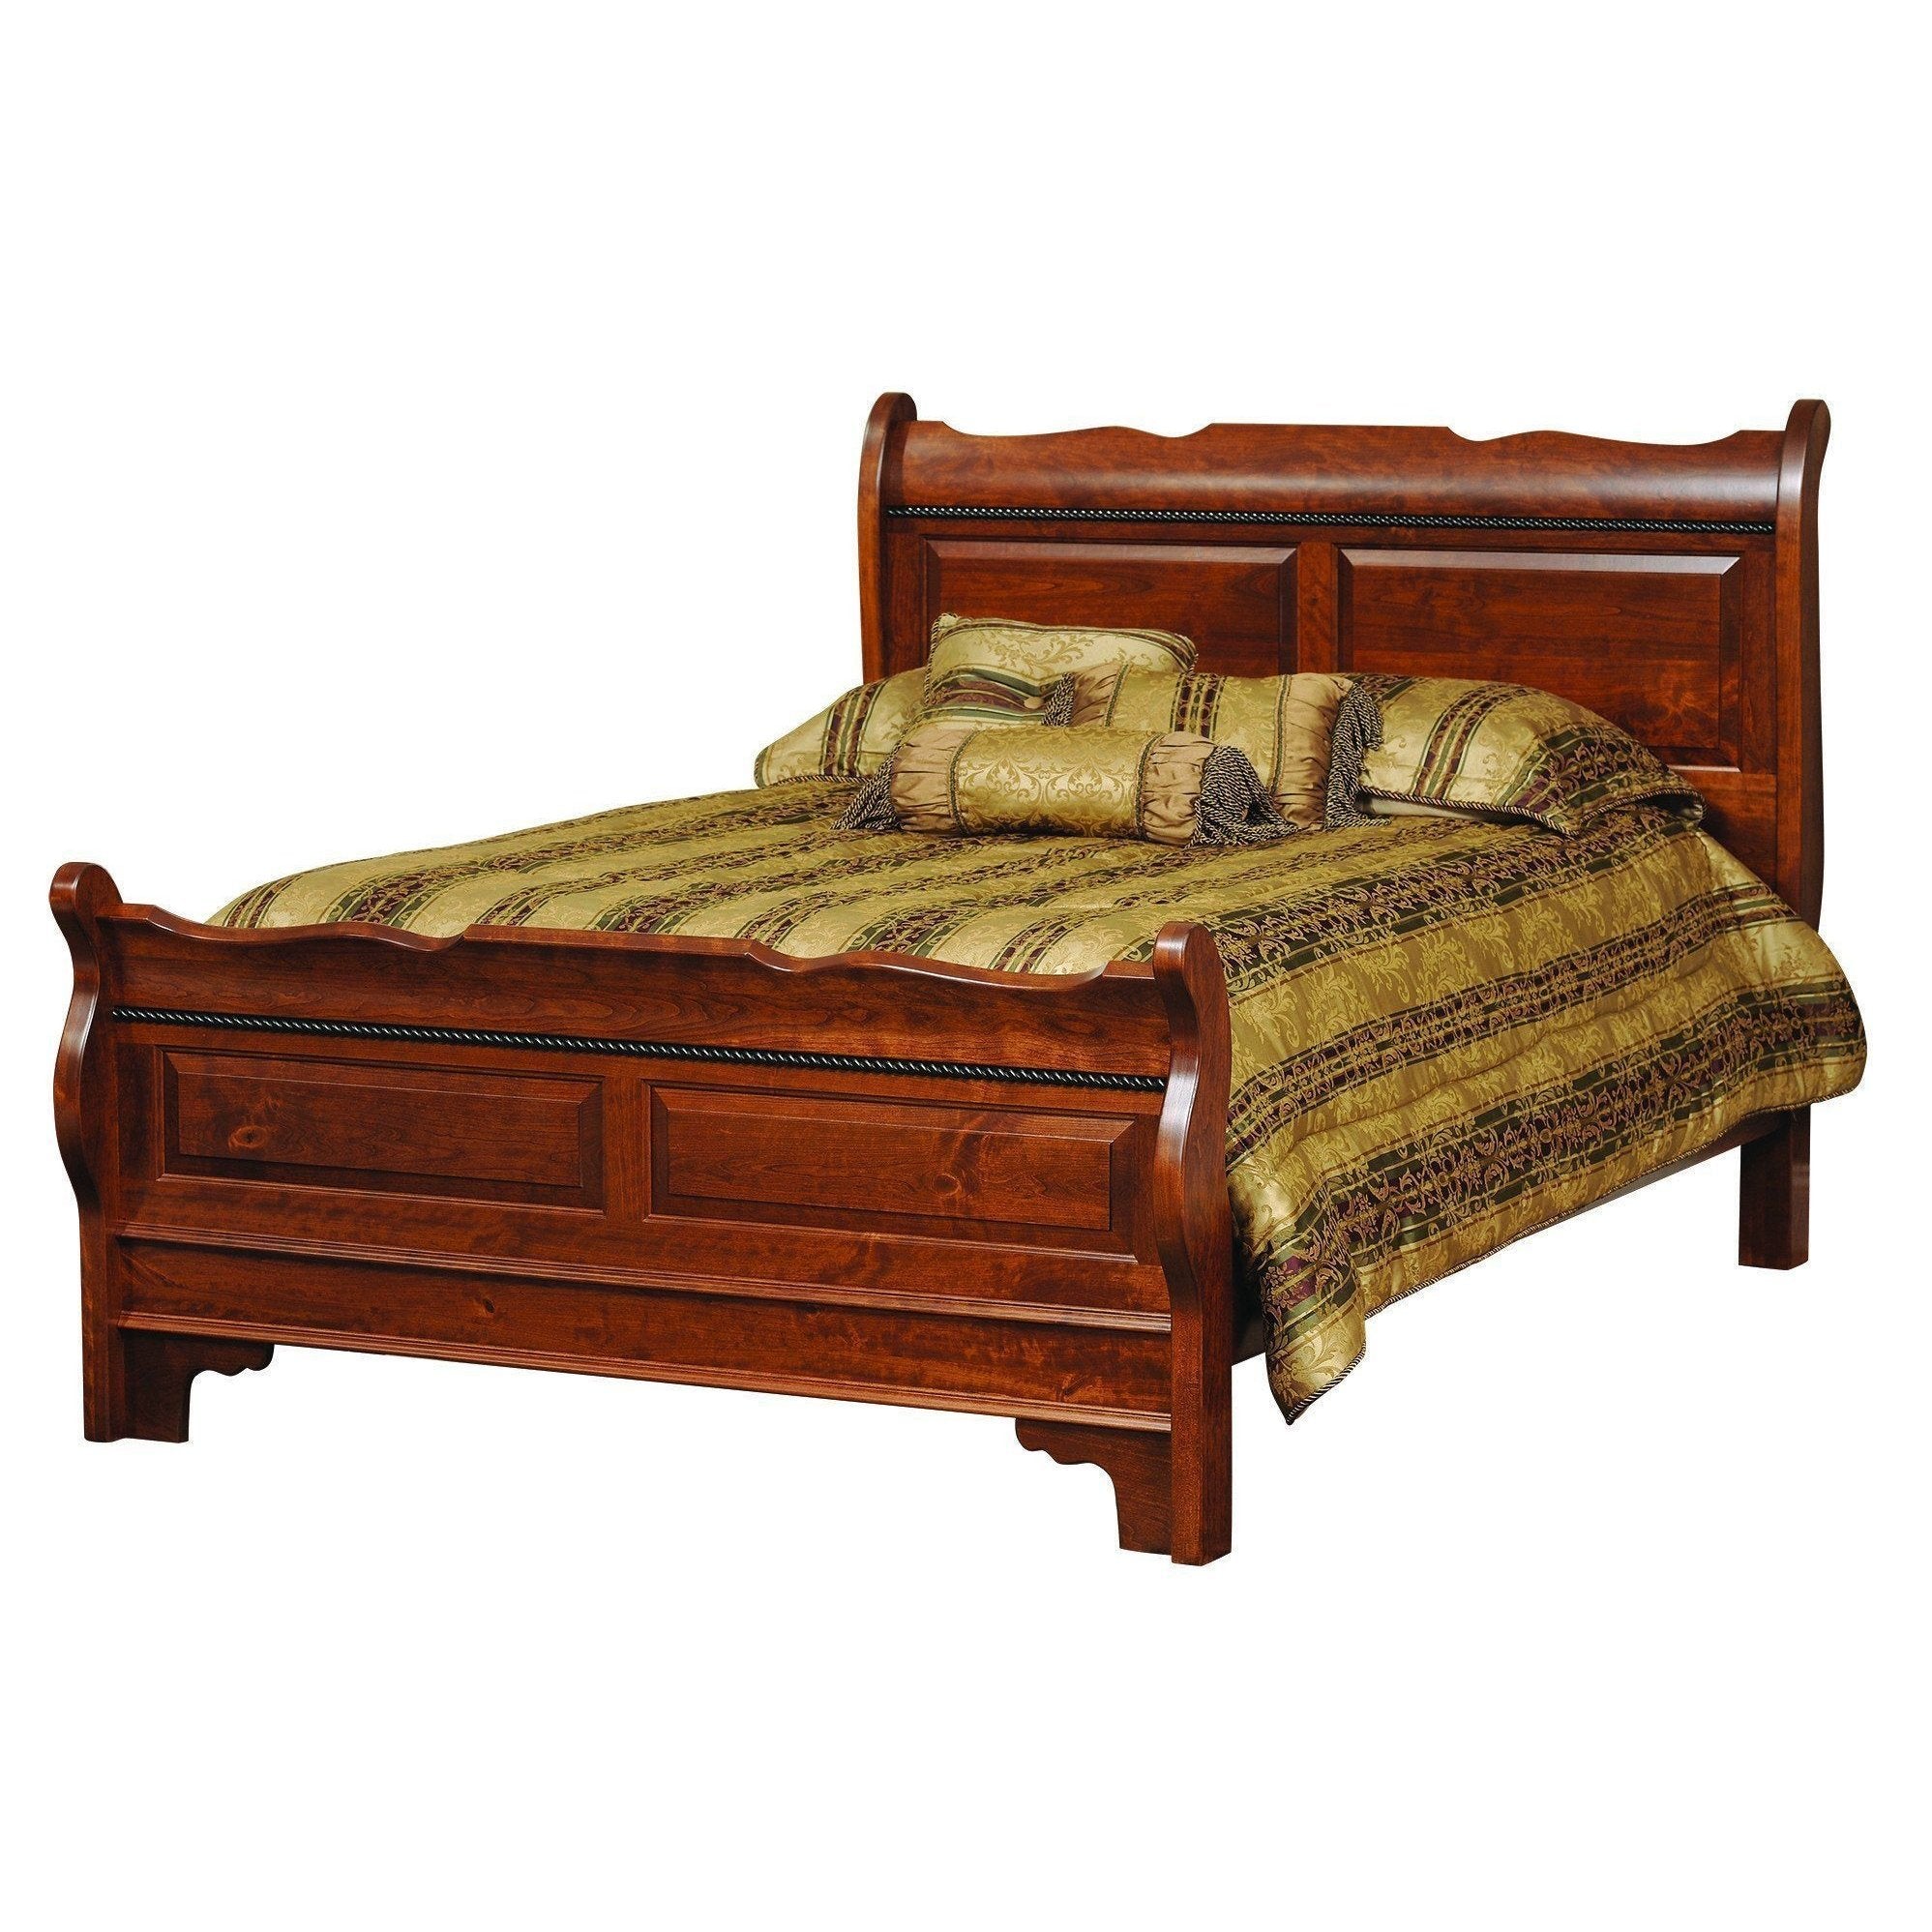 Merlot Bed-Bedroom-The Amish House